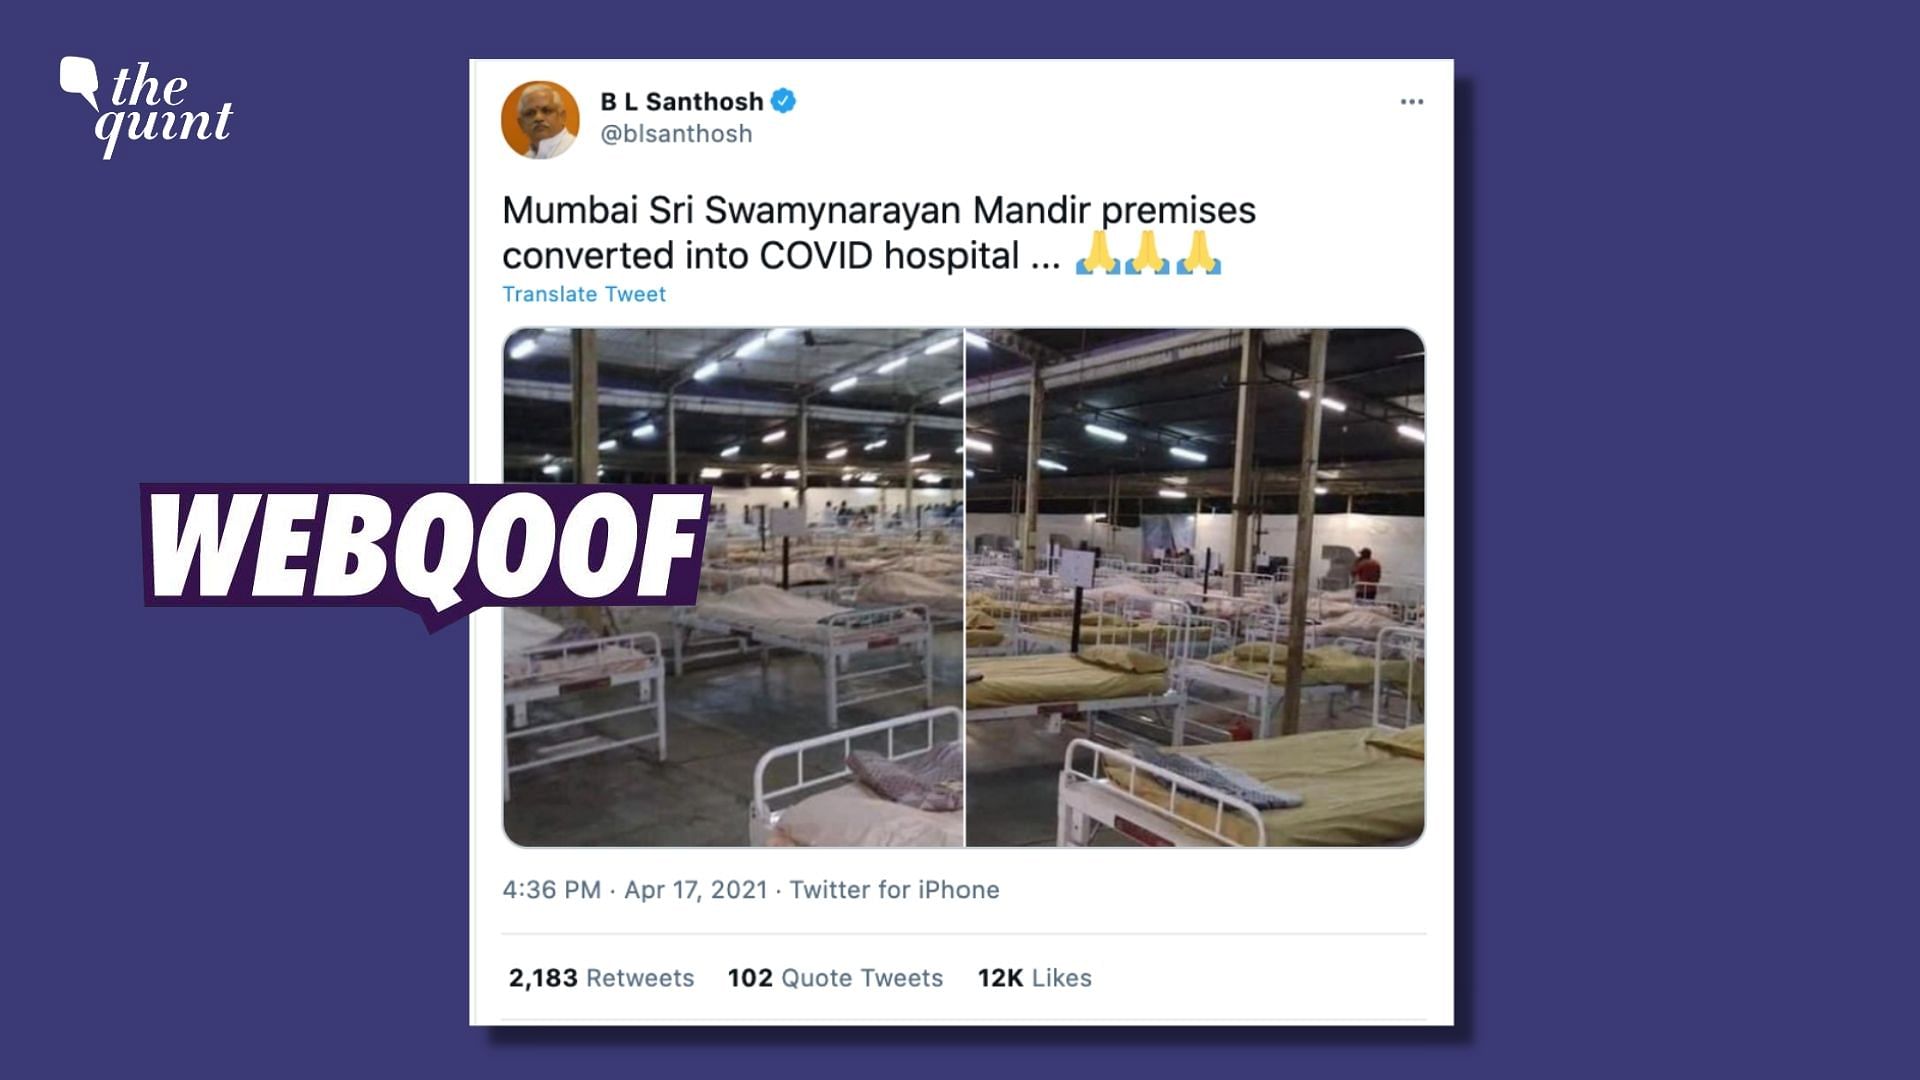 A set of images are being shared to falsely claim that they show premises of Shri Swaminarayan temple being converted to a <a href="https://www.thequint.com/topic/coronavirus">COVID-19</a> facility in Mumbai.